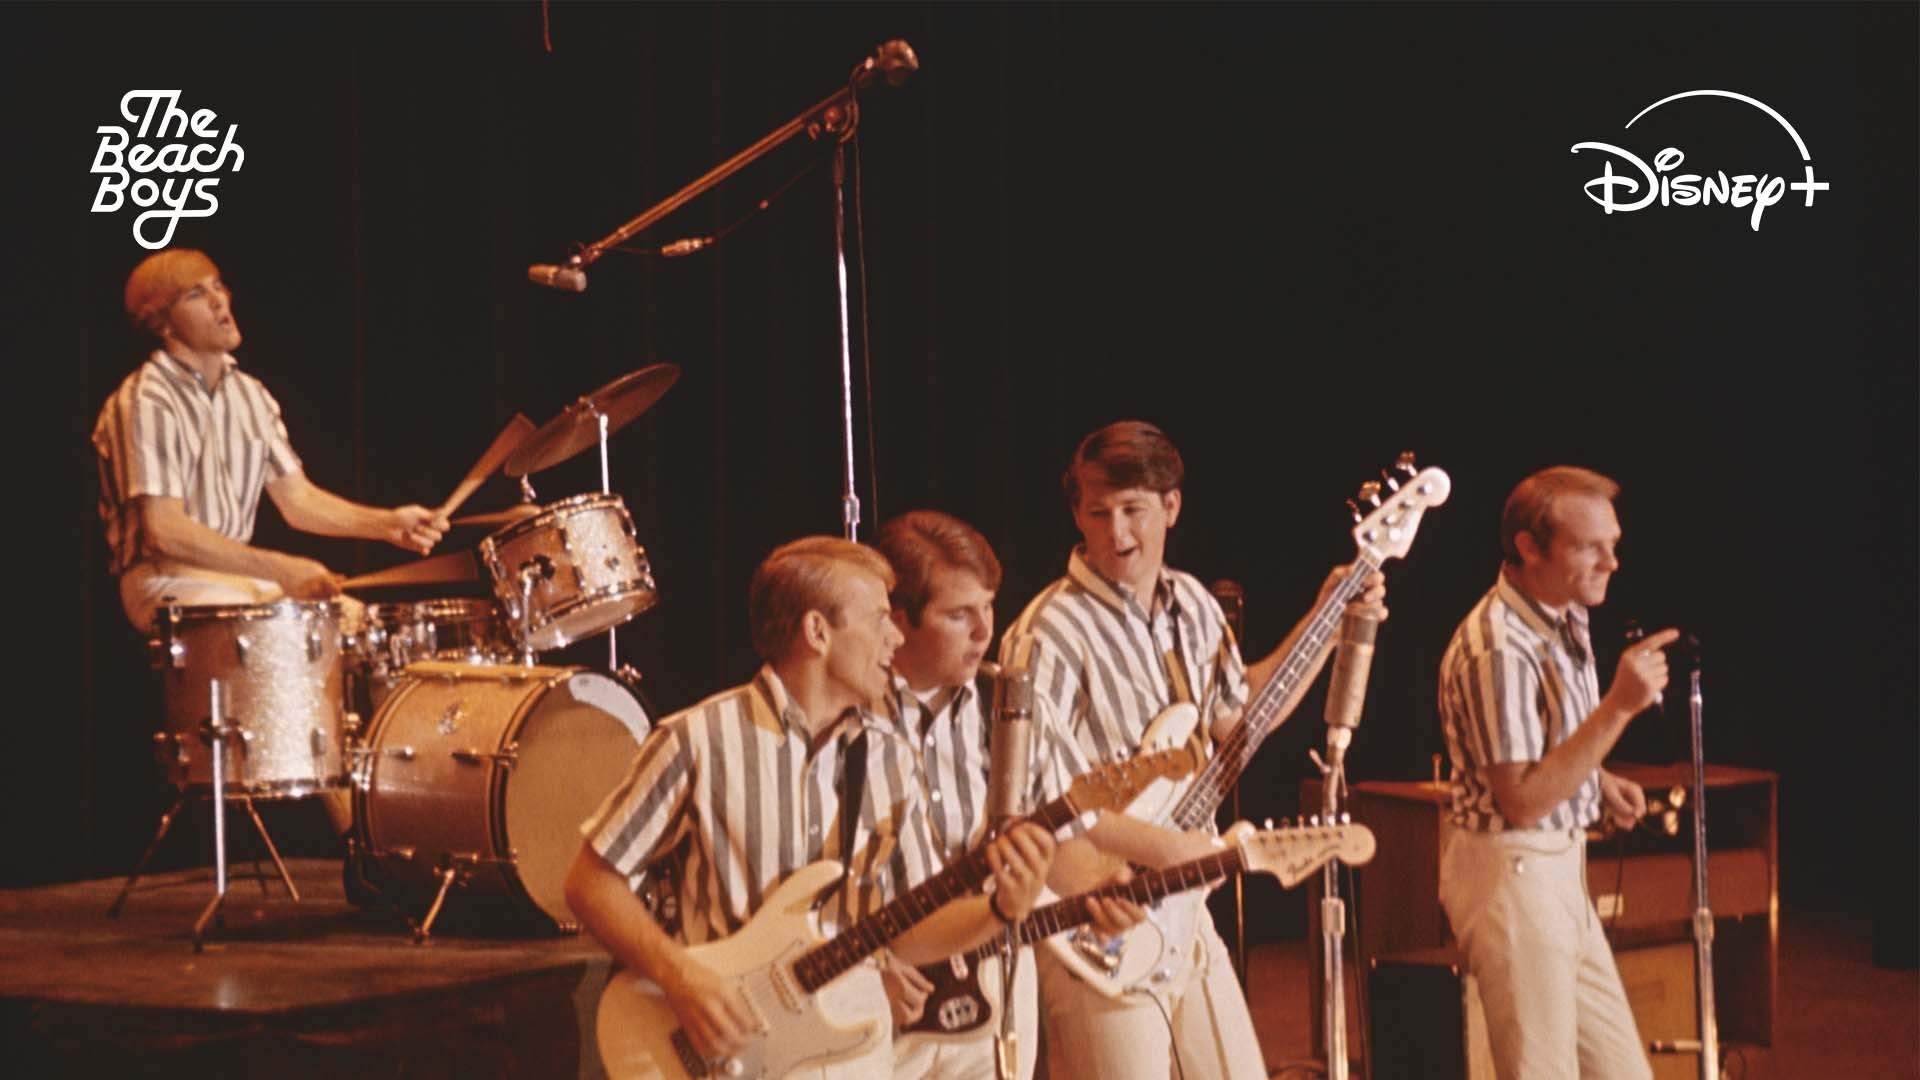 The good, the bad and the ugly: Rock group The Beach Boys get candid in new Disney+ documentary